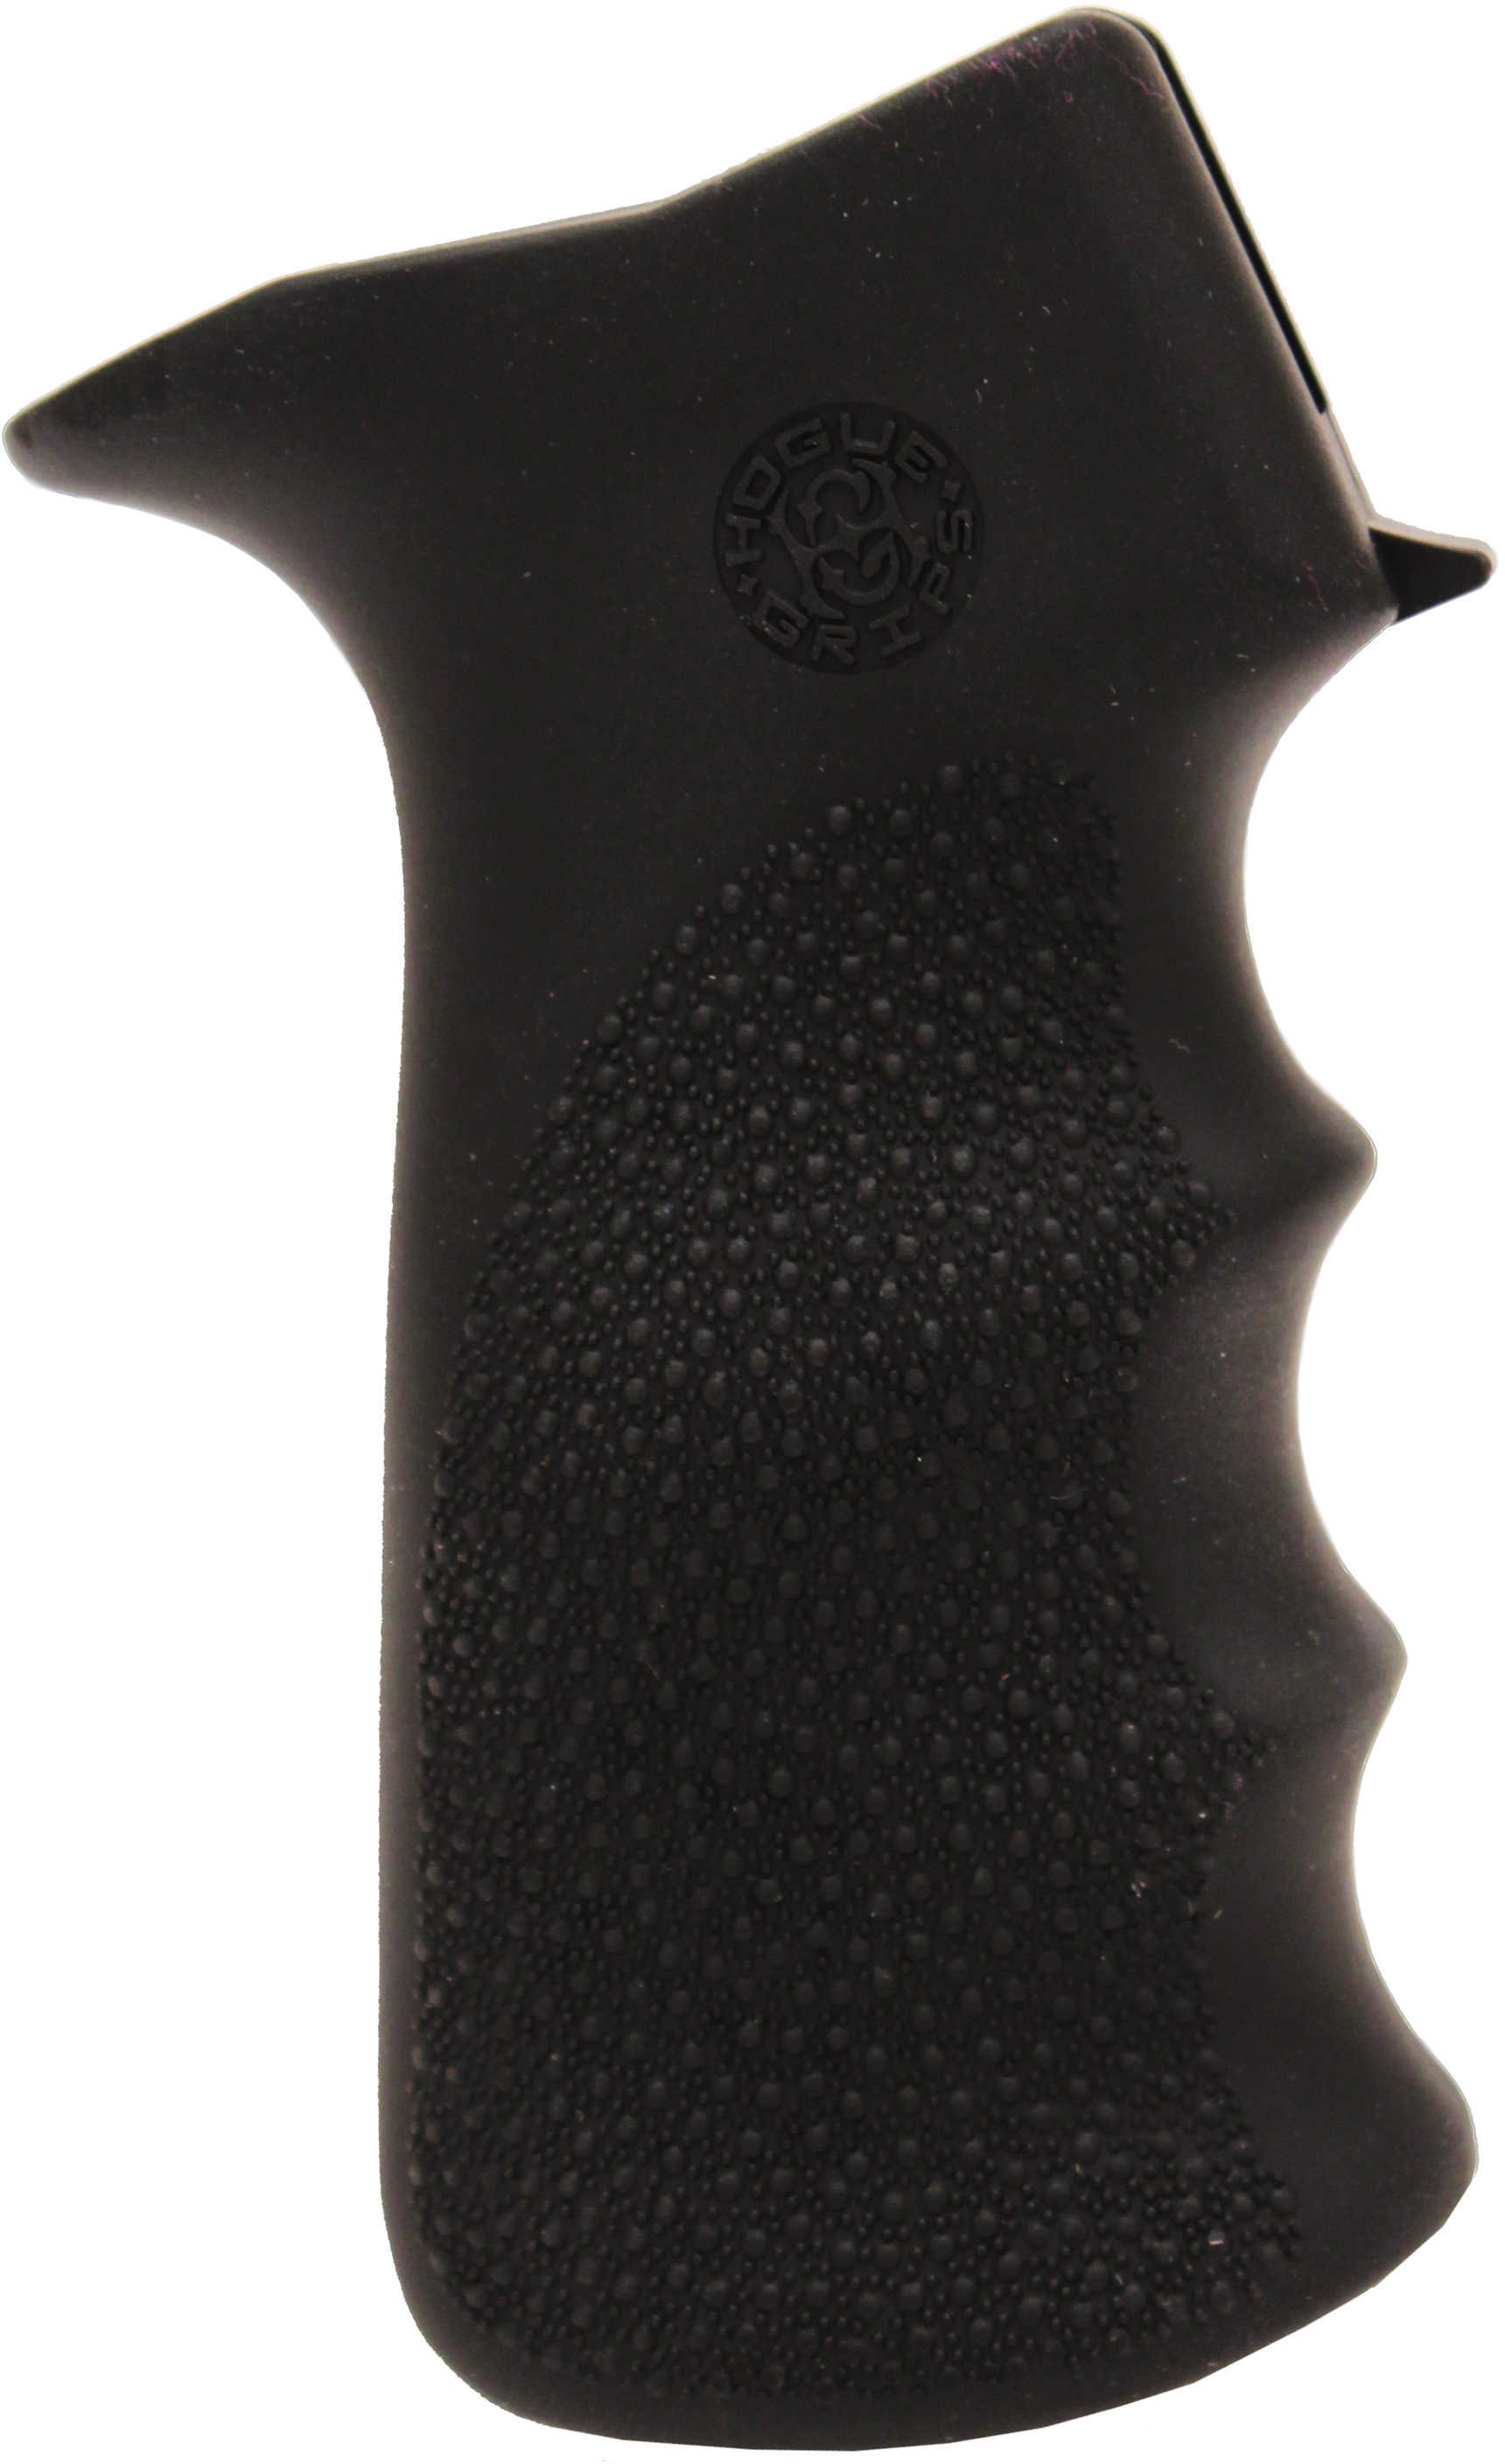 Hogue Grips Overmolded Rifle Fits Sig 556 Finger Grooves Rubber Black 55020